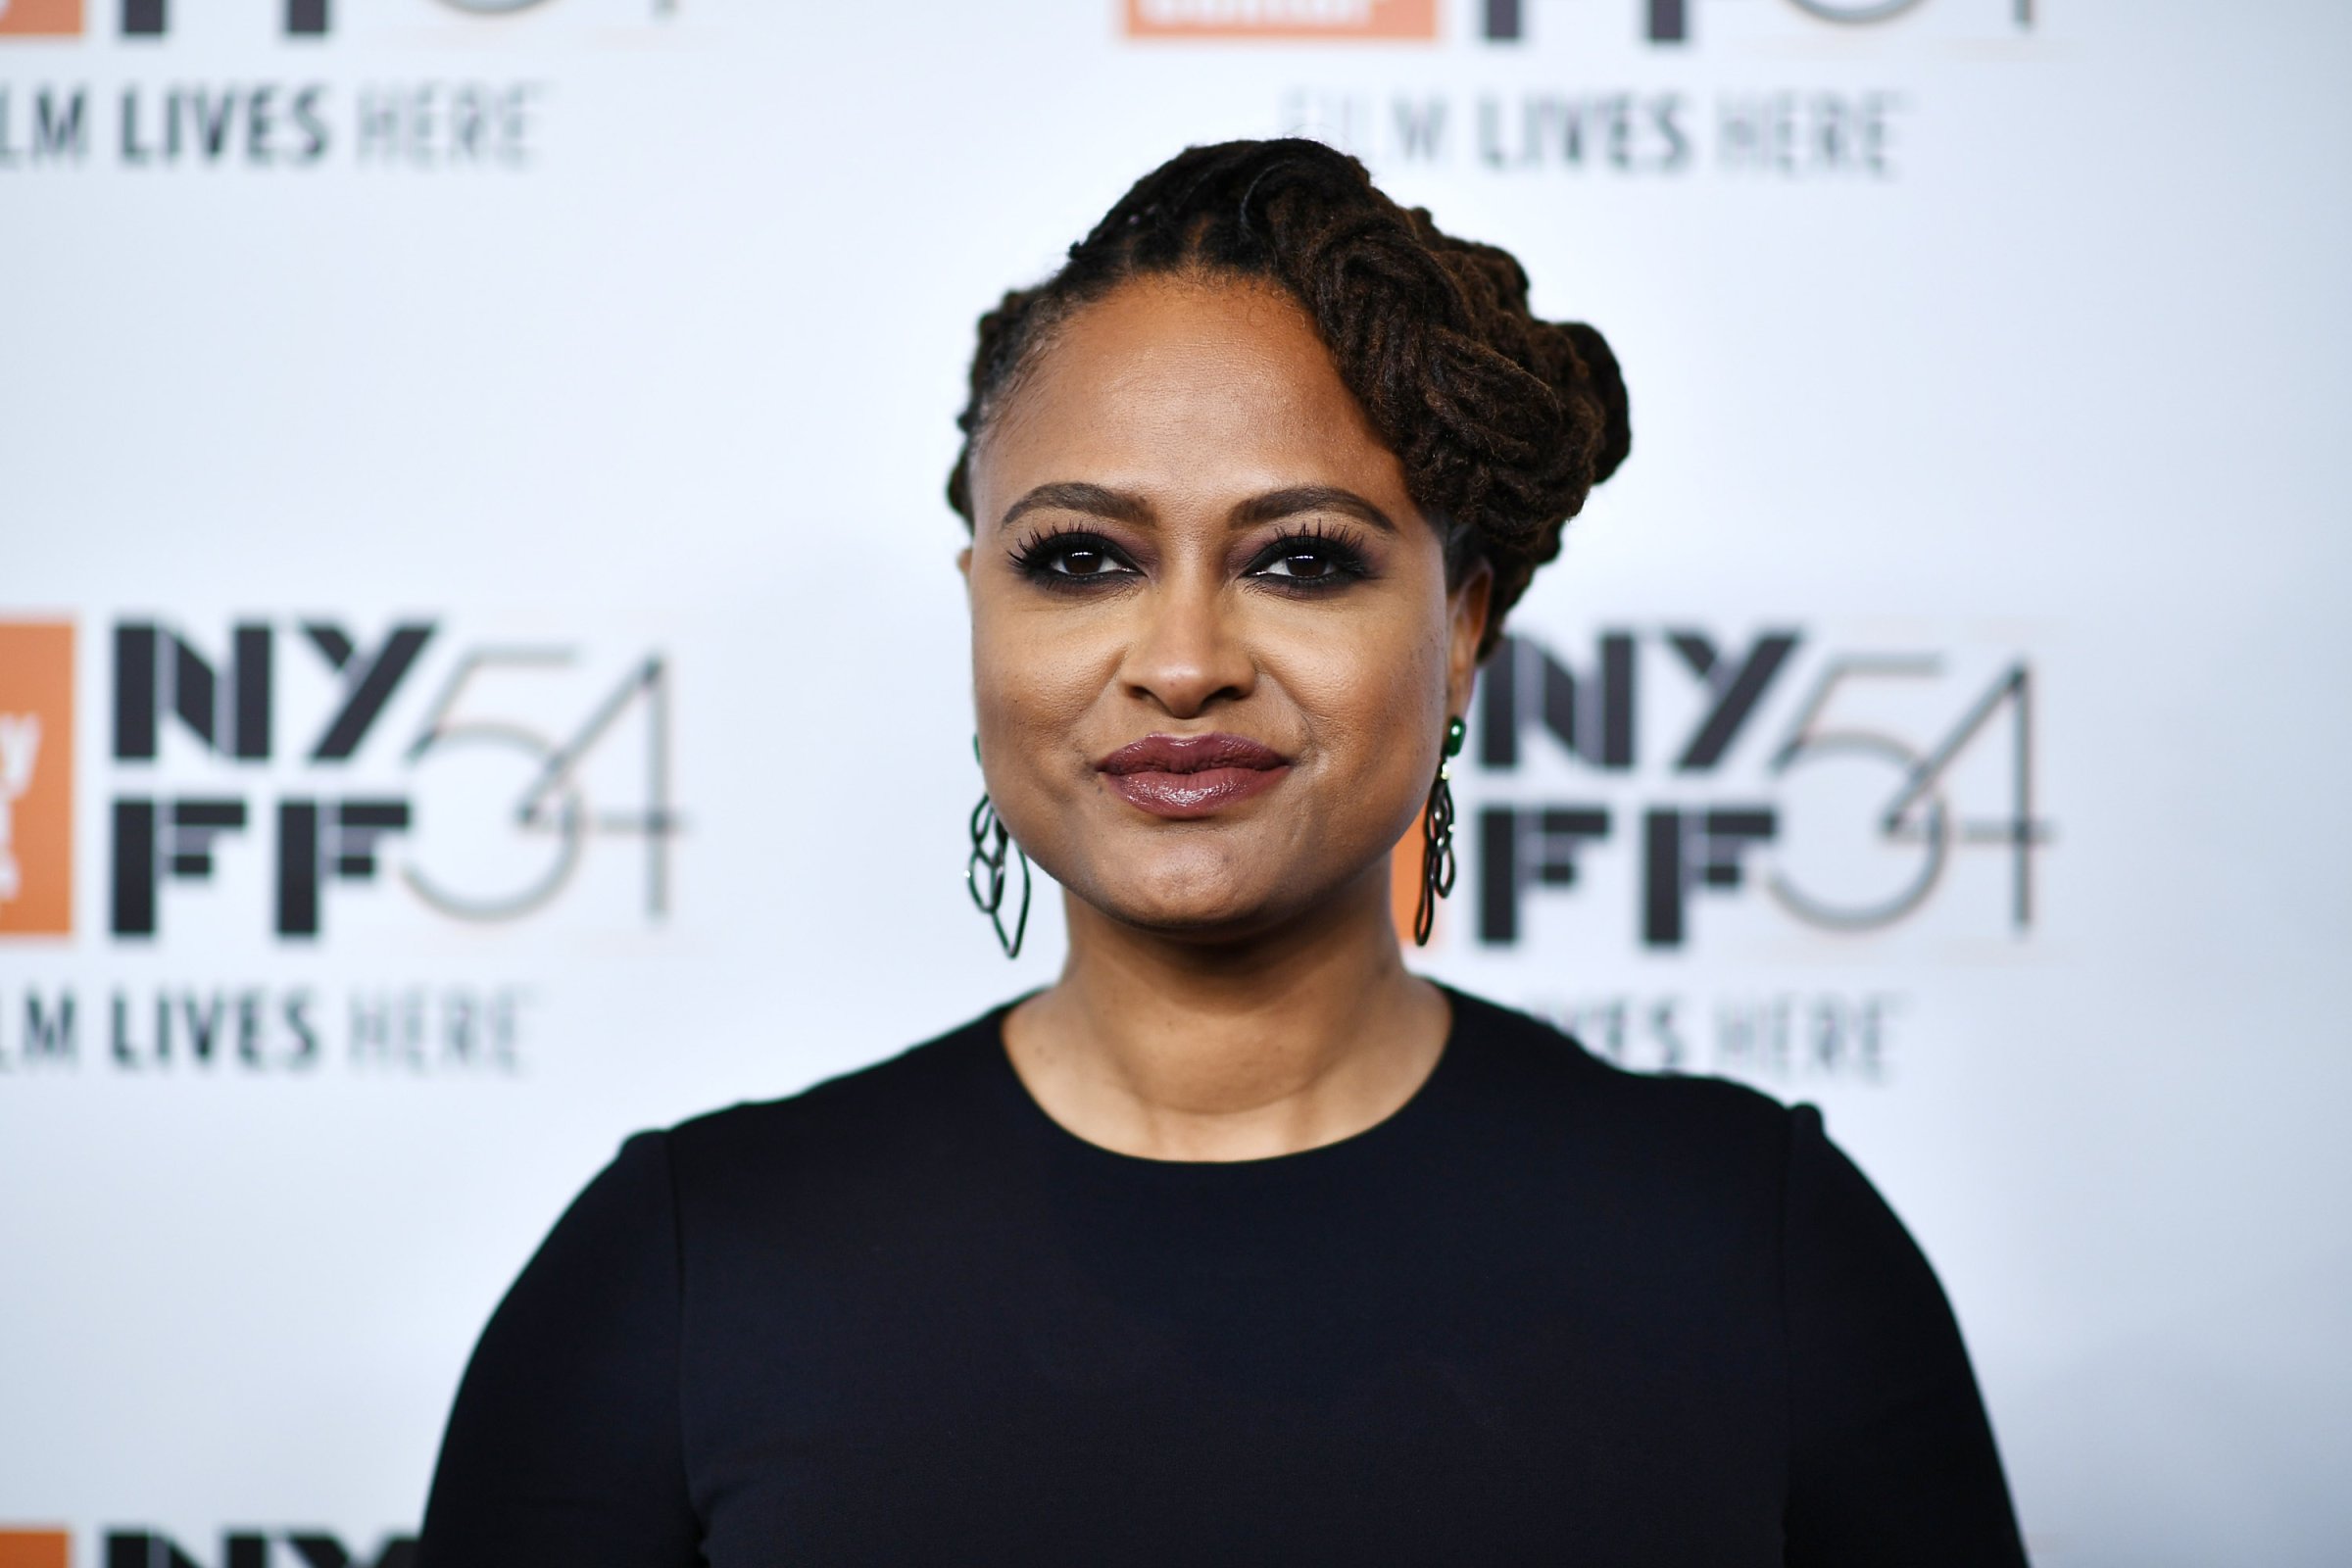 Director Ava DuVernay attends the 54th New York Film Festival opening night gala presentation and "13th" world premiere at Alice Tully Hall at Lincoln Center on September 30, 2016 in New York City.